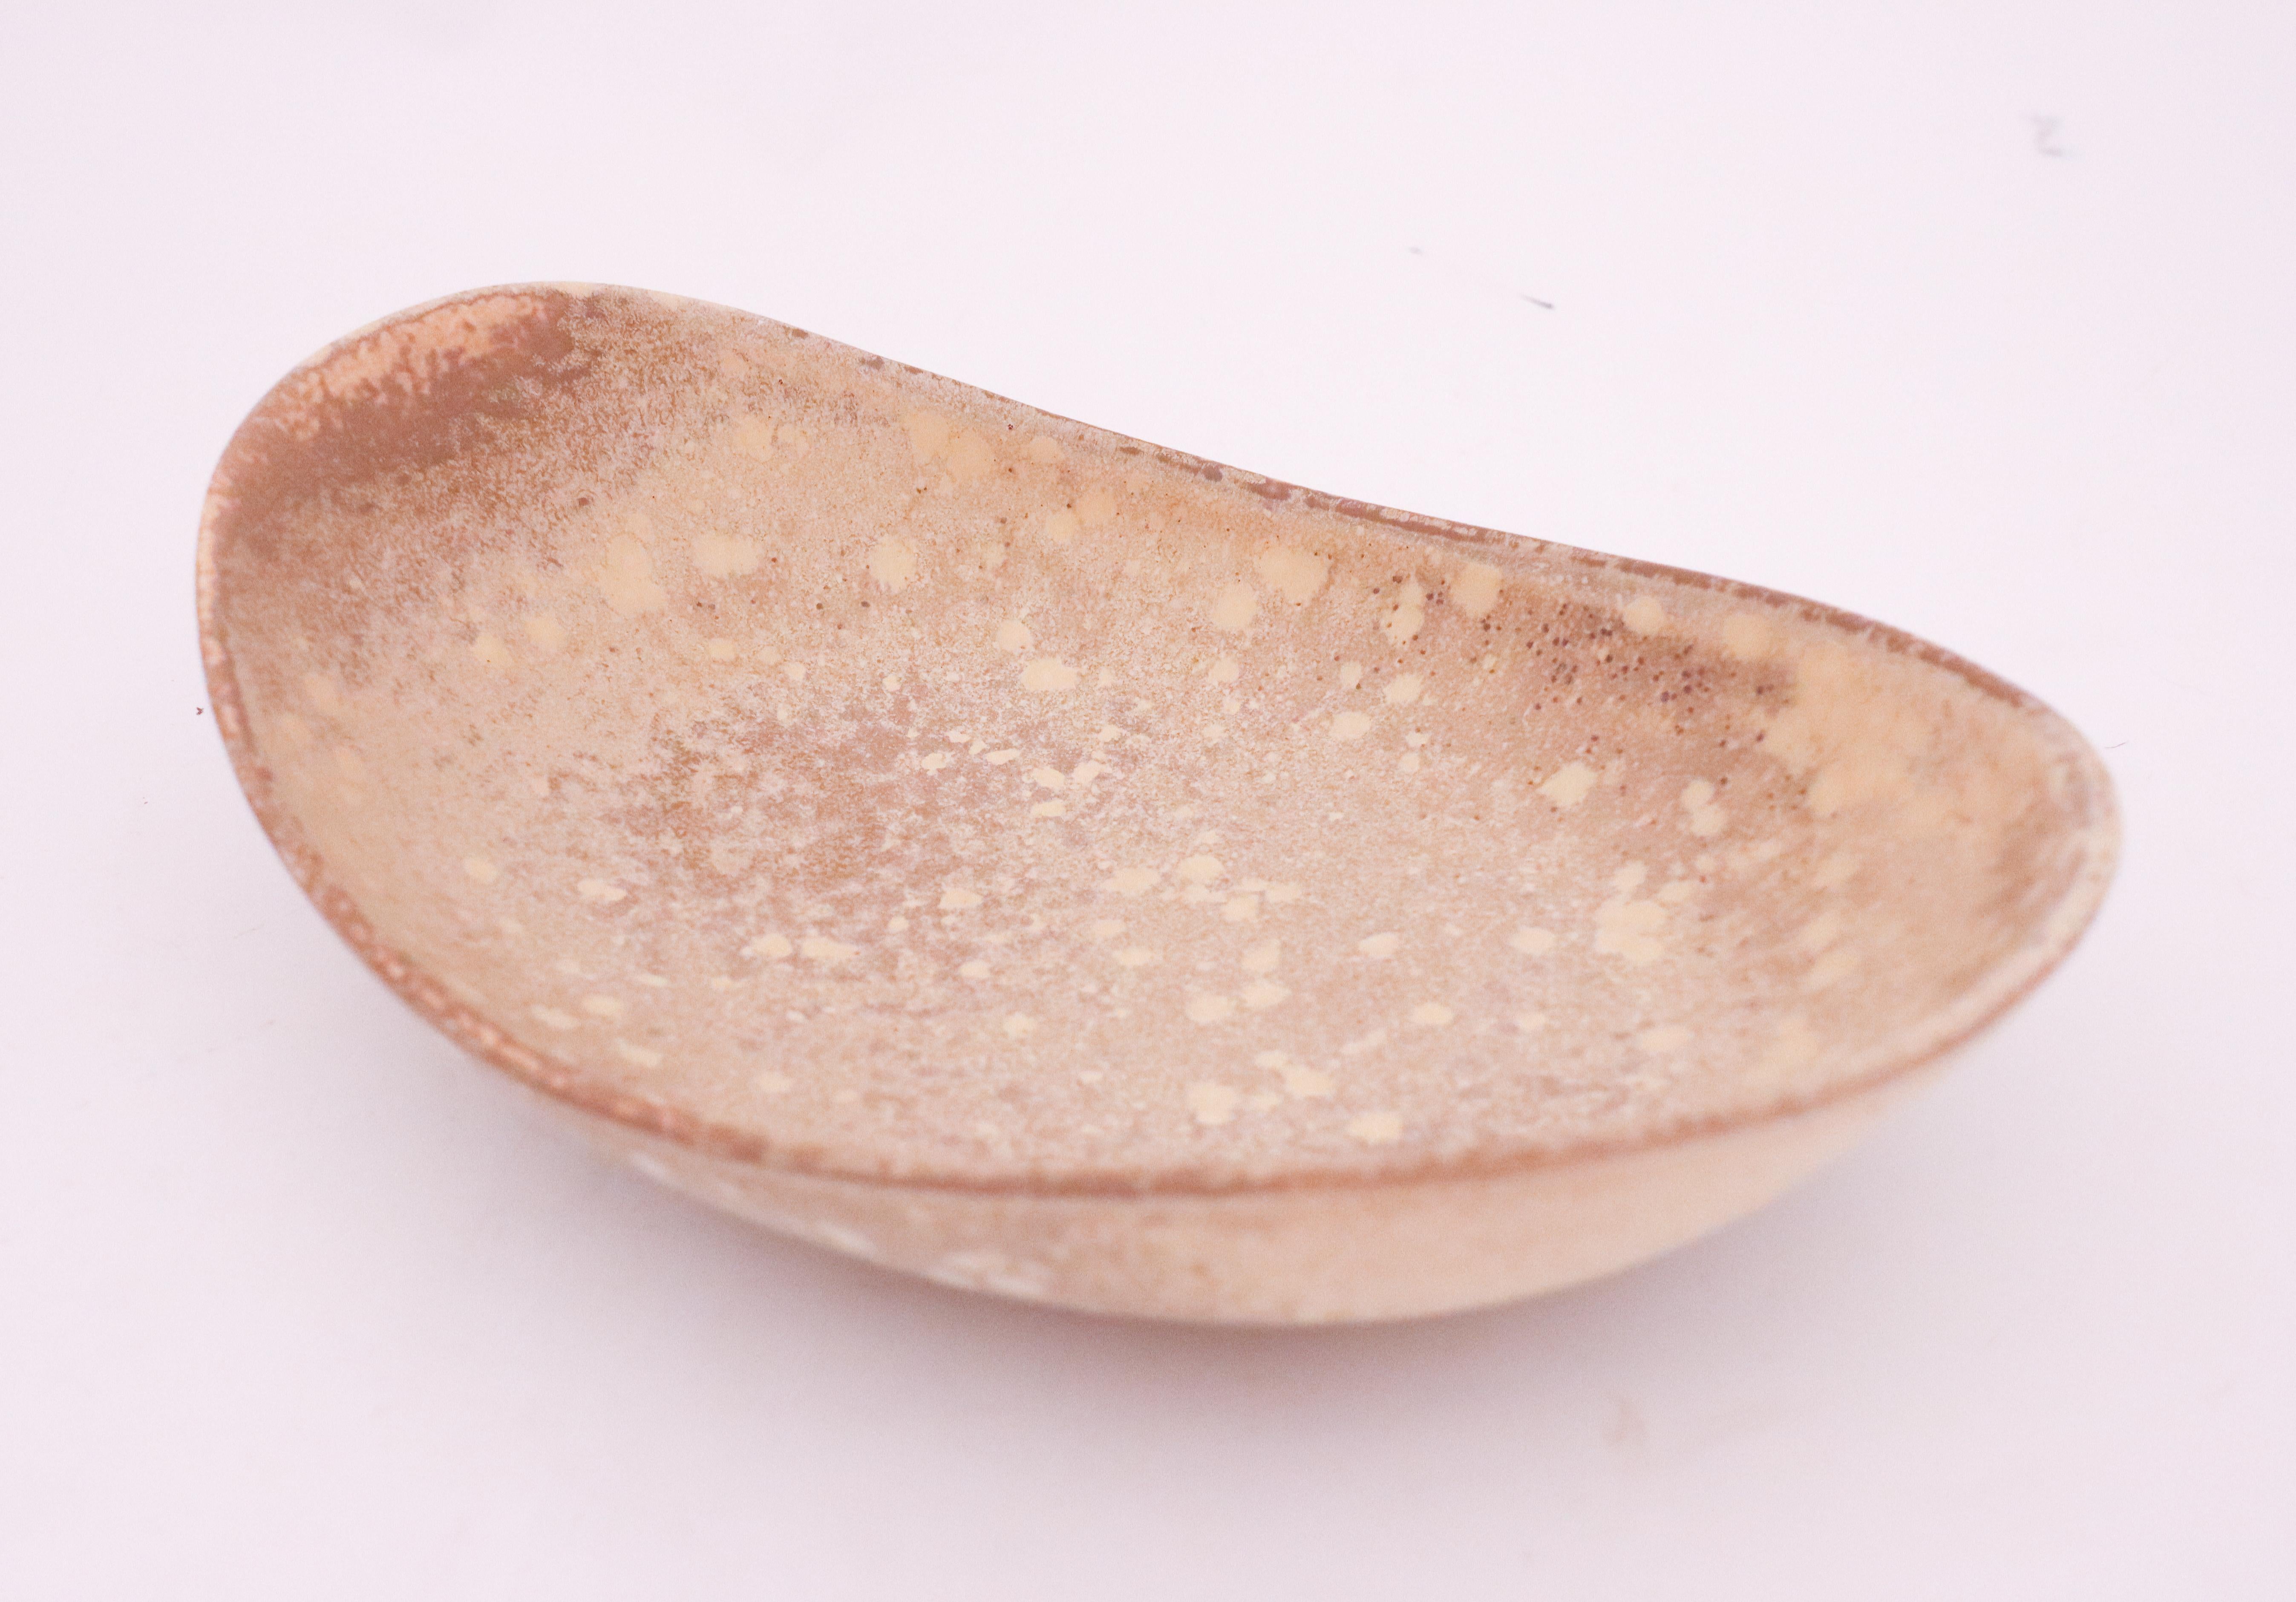 A grey speckled midcentury Swedish bowl in ceramic by Rörstrand, designed by Carl-Harry Stålhane. Measures: The bowl is 27,5 x 18,5 cm in diameter and 7 cm high. It is in mint condition.

Carl-Harry Stålhane is one of the top names when it comes to